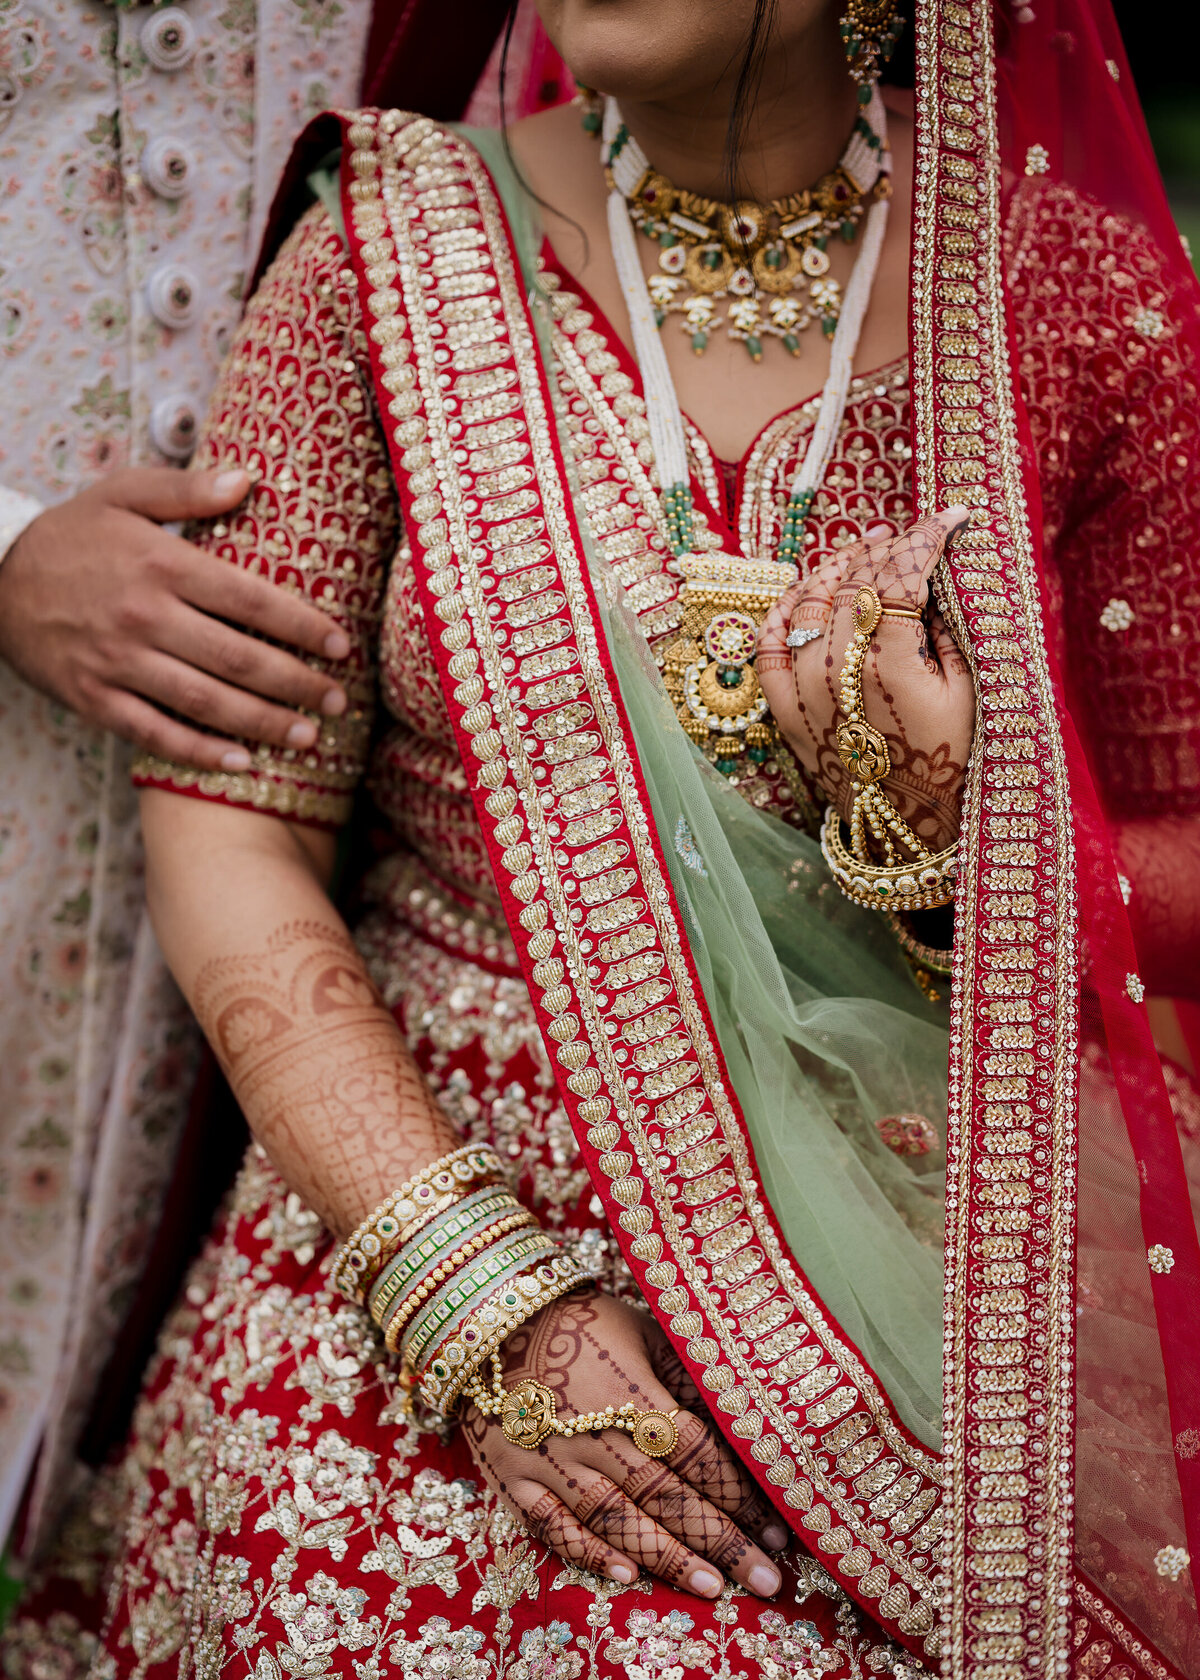 Ishan Fotografi works with NJ's top South Asian wedding vendors for your dream day. Contact today!